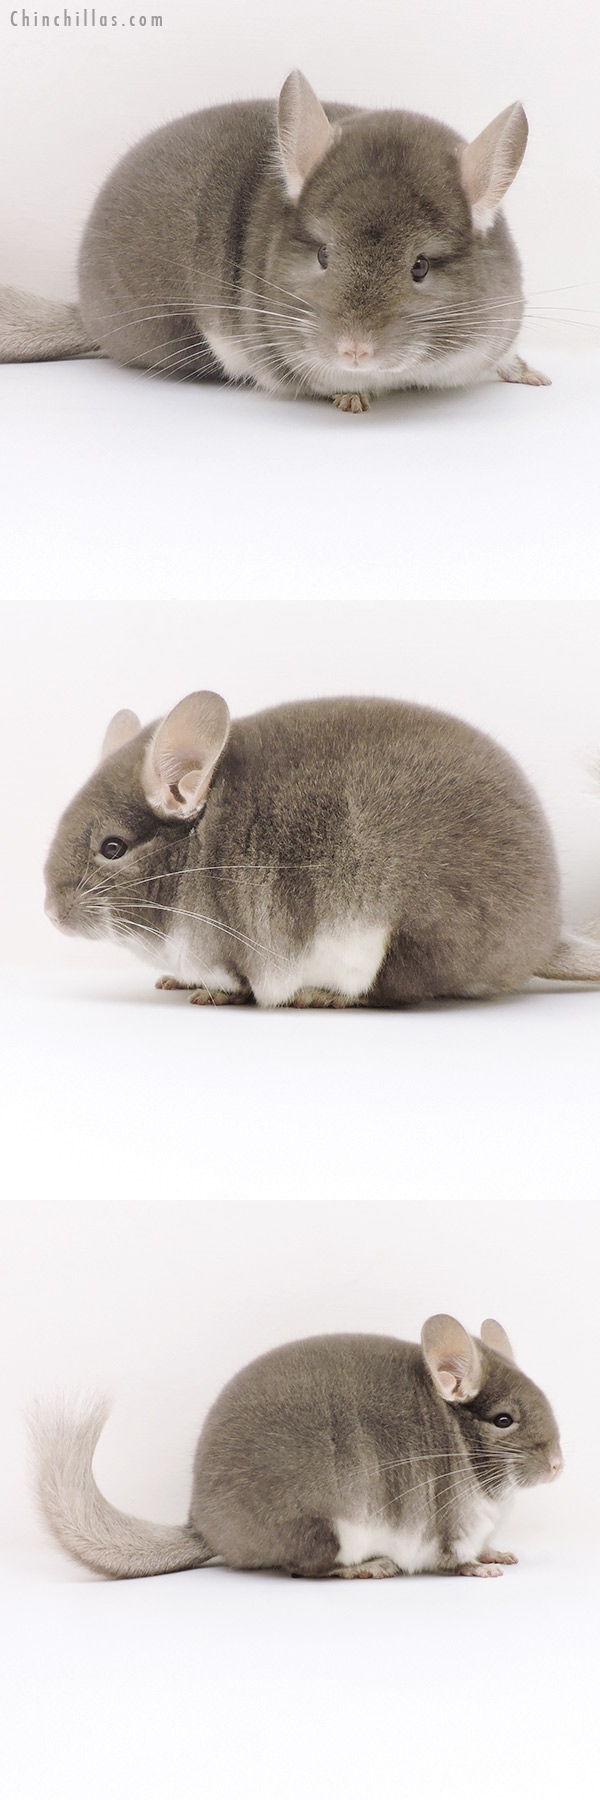 Chinchilla or related item offered for sale or export on Chinchillas.com - 17130 Premium Production Quality TOV Beige / Brown Velvet Female Chinchilla